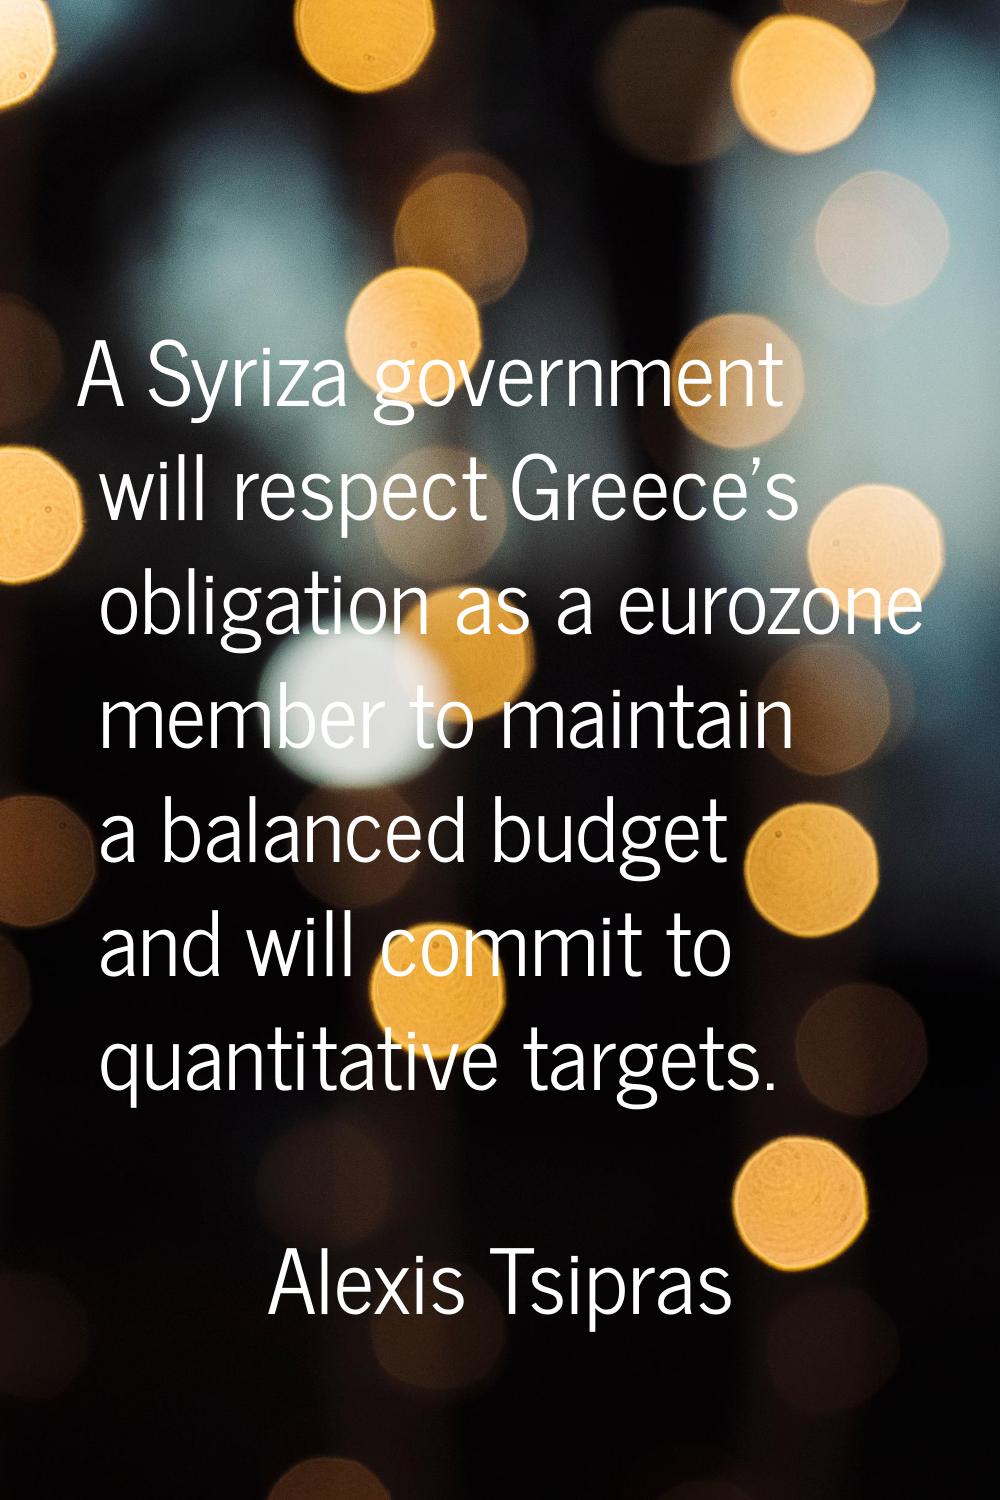 A Syriza government will respect Greece's obligation as a eurozone member to maintain a balanced bu